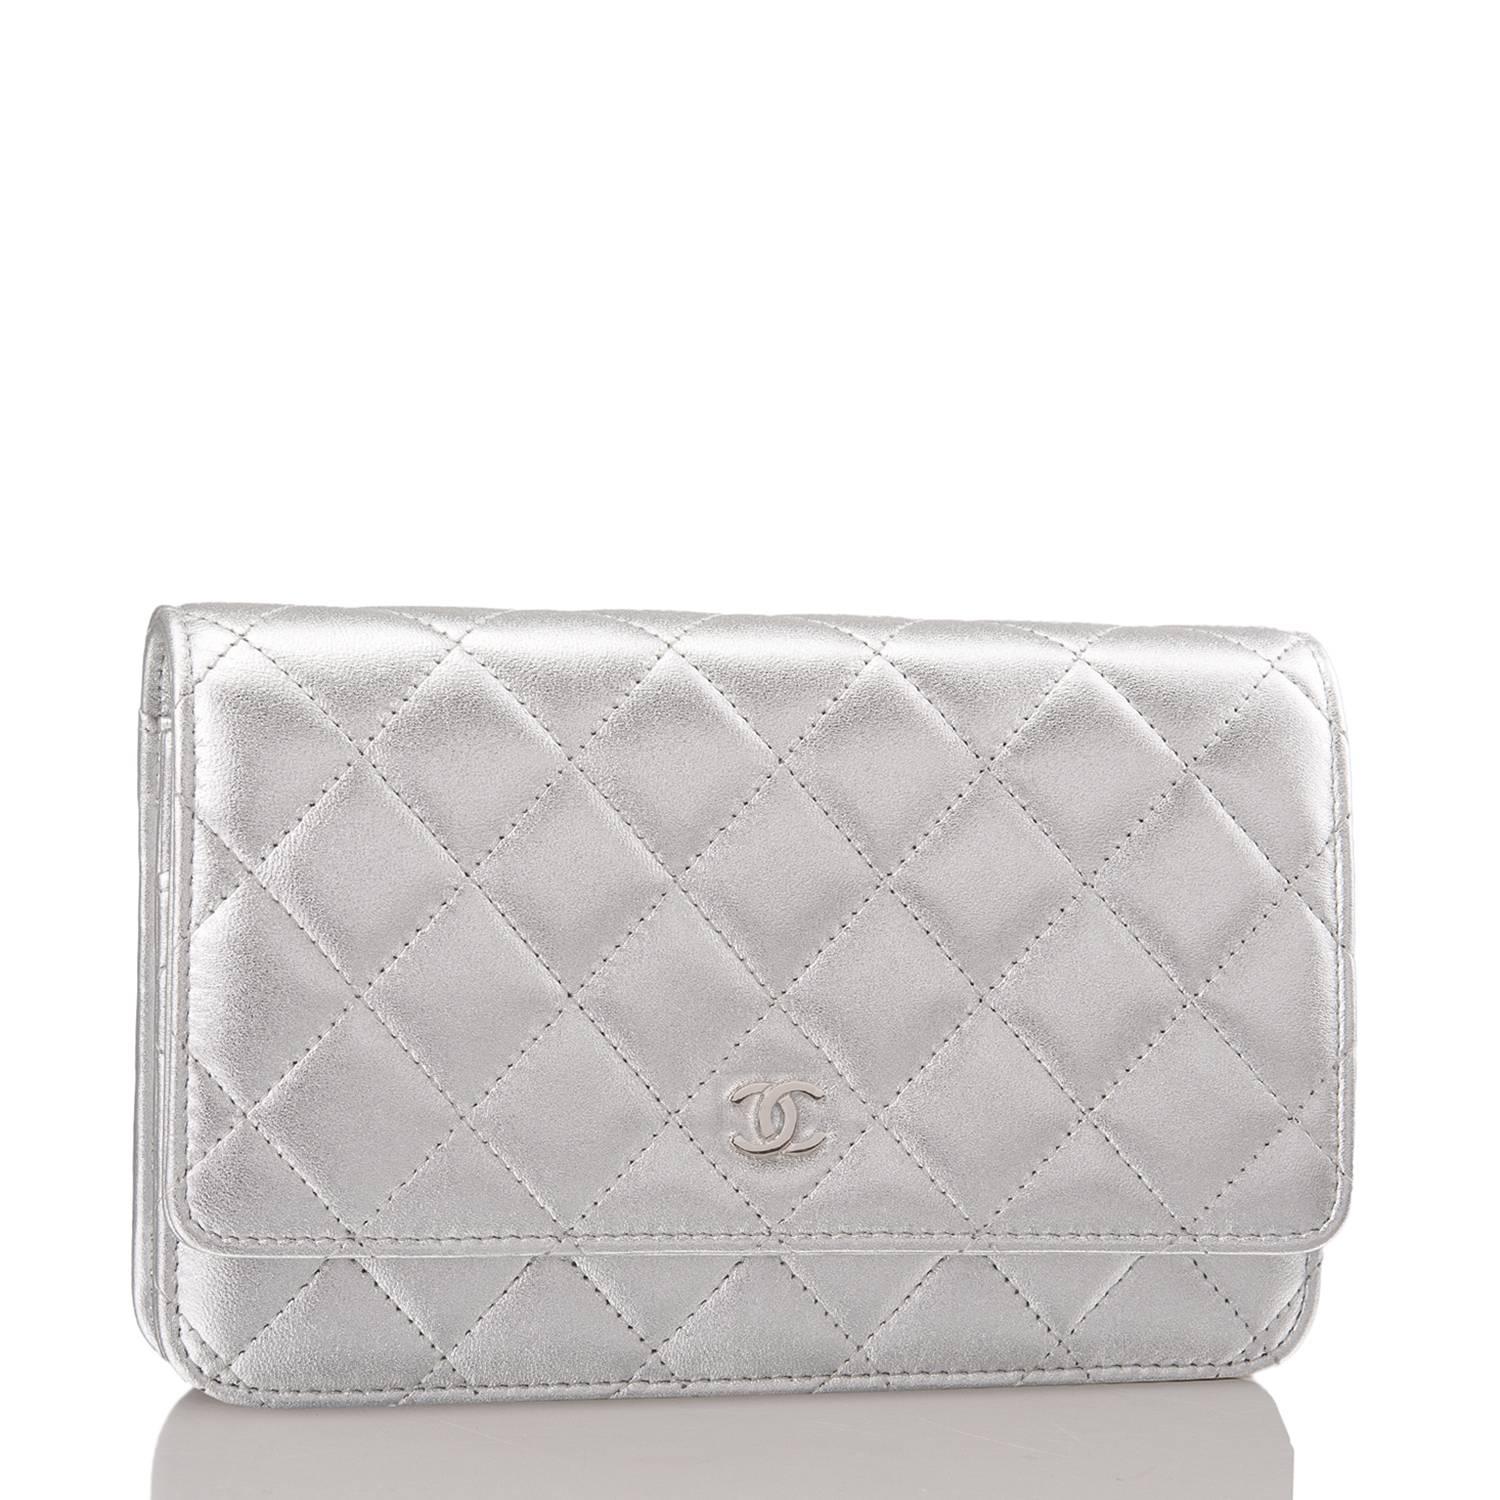 Chanel Classic Wallet On Chain (WOC) of silver lambskin leather with silver tone hardware.

This Wallet On Chain features signature Chanel quilting, a front flap with CC charm and hidden snap closure, a half moon pocket at the rear and an